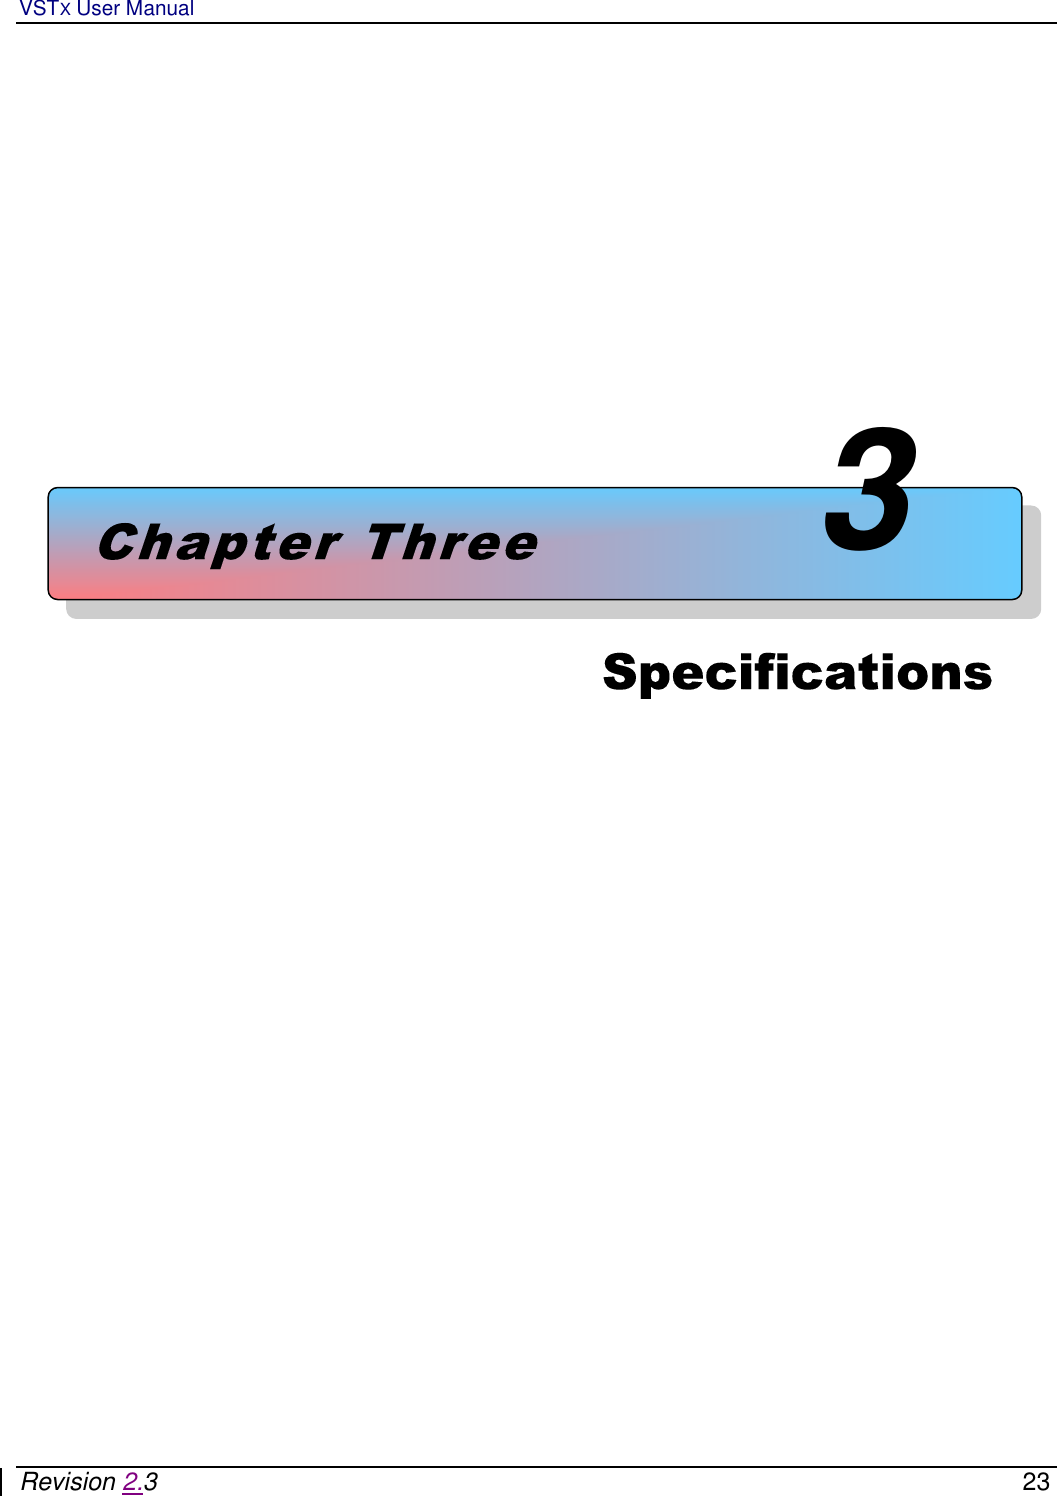 VSTX User Manual   Revision 2.3    23            Chapter Three3Specifications     